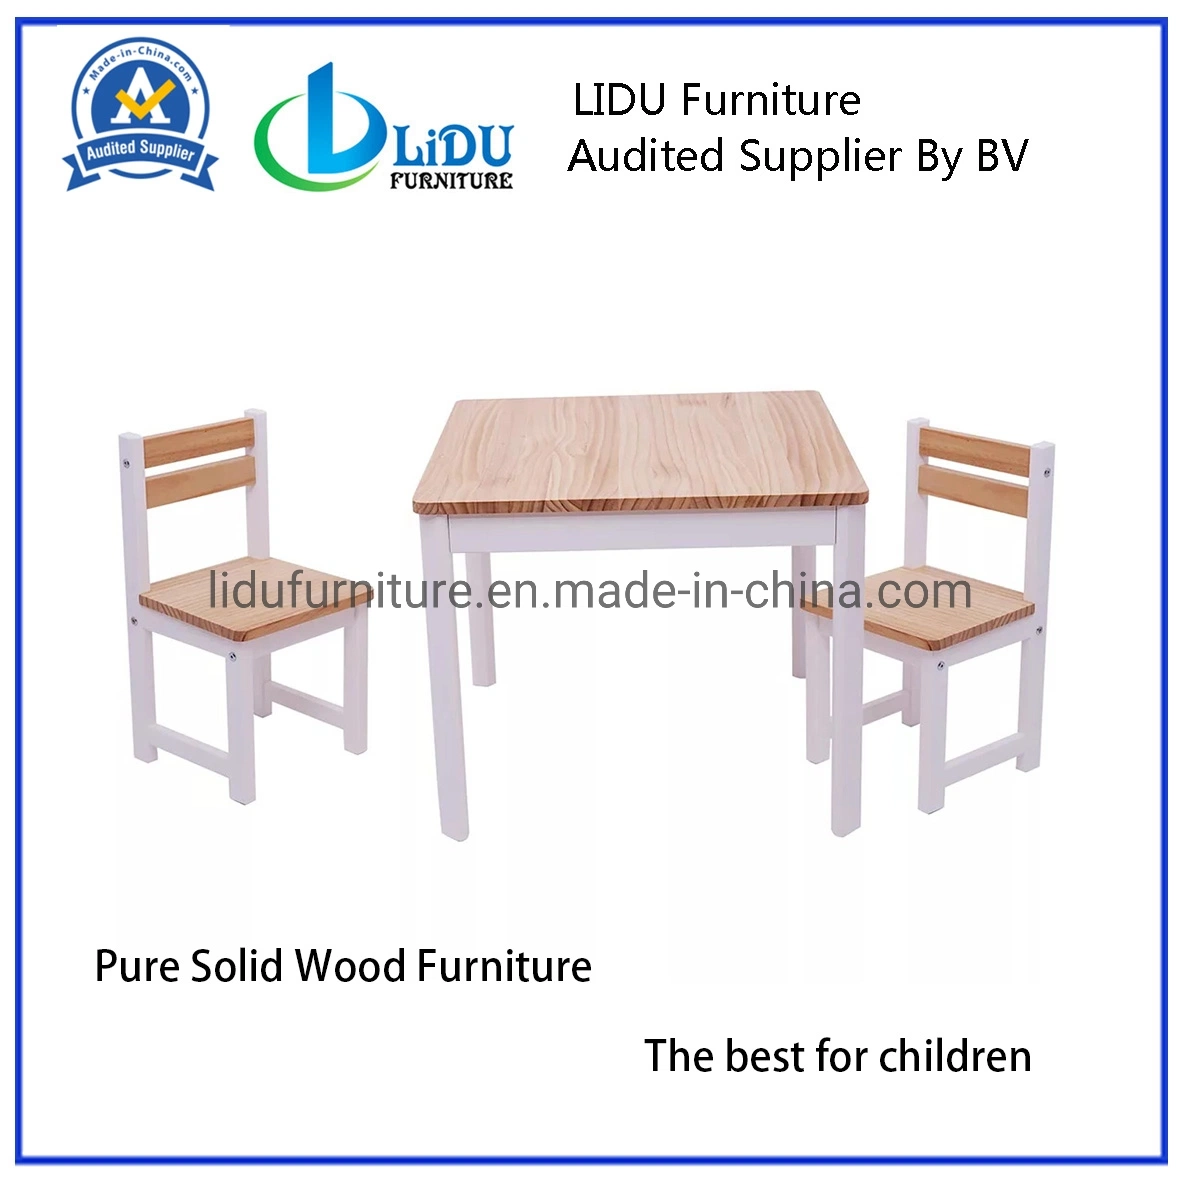 Kids Play Table with Chair/Wooden Preschool Chair/Study Table and Chairs/Table for Kids/Activity Table for Playroom